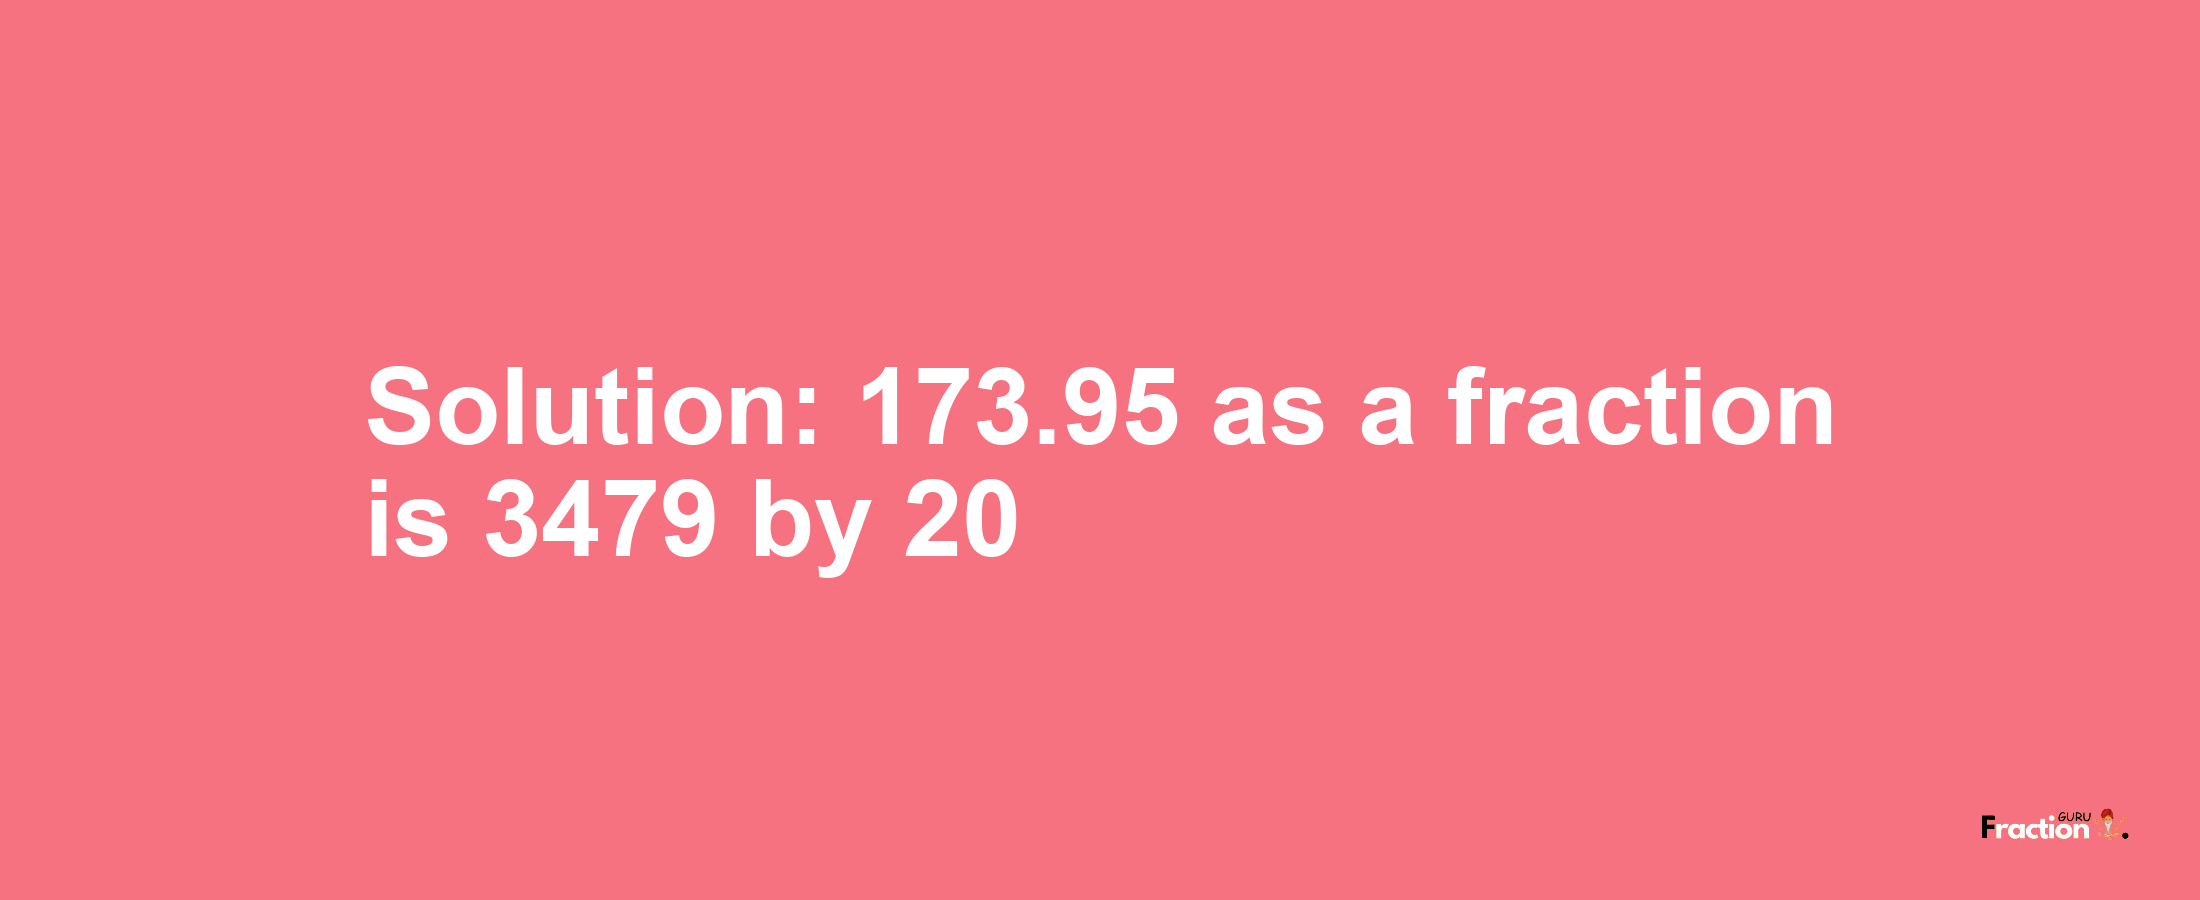 Solution:173.95 as a fraction is 3479/20